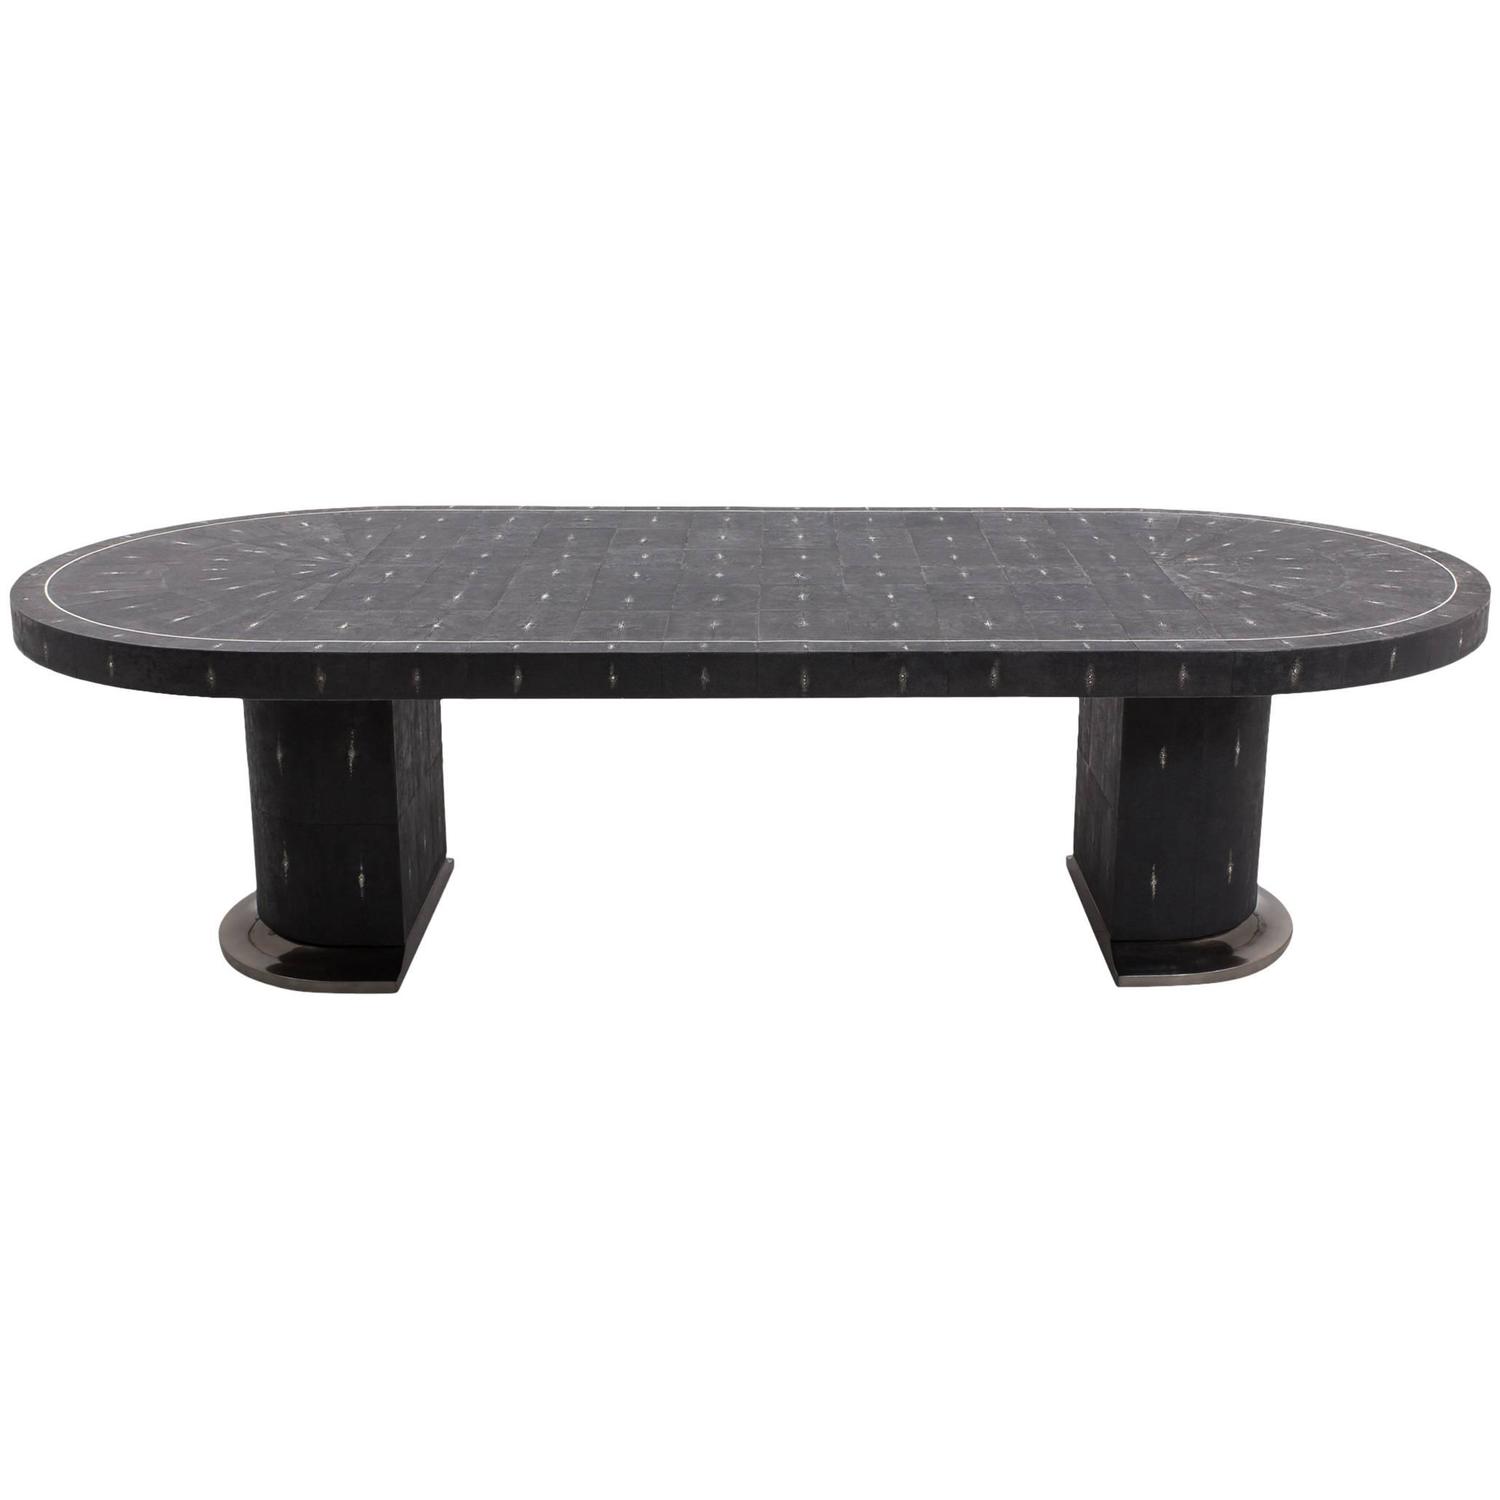 Ron Seff, Shagreen Racetrack Dining Table, USA, circa 1980 For Sale at